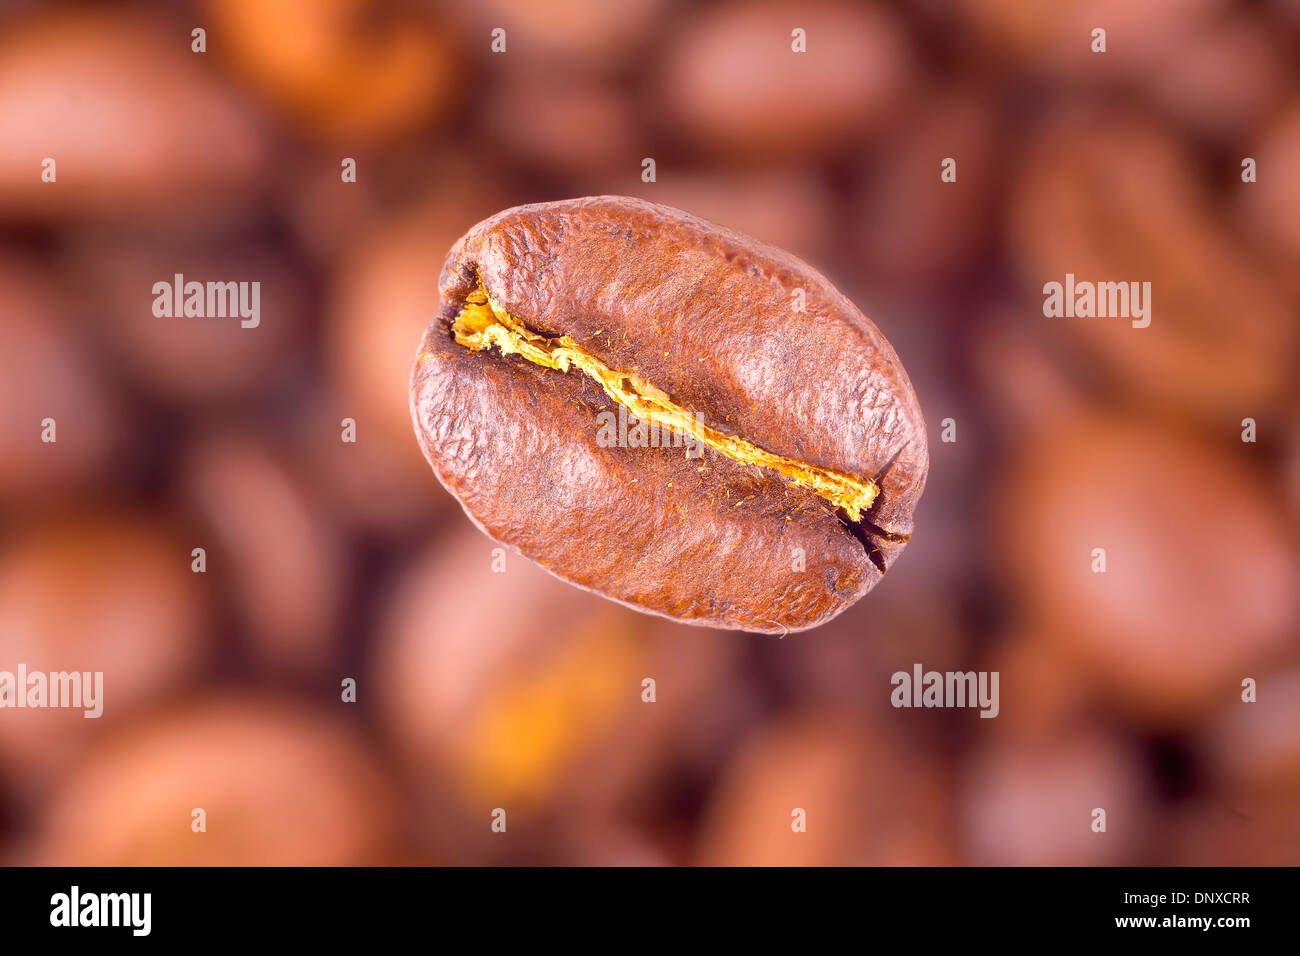 Macro shot of a coffee bean on blurred beans background Stock Photo